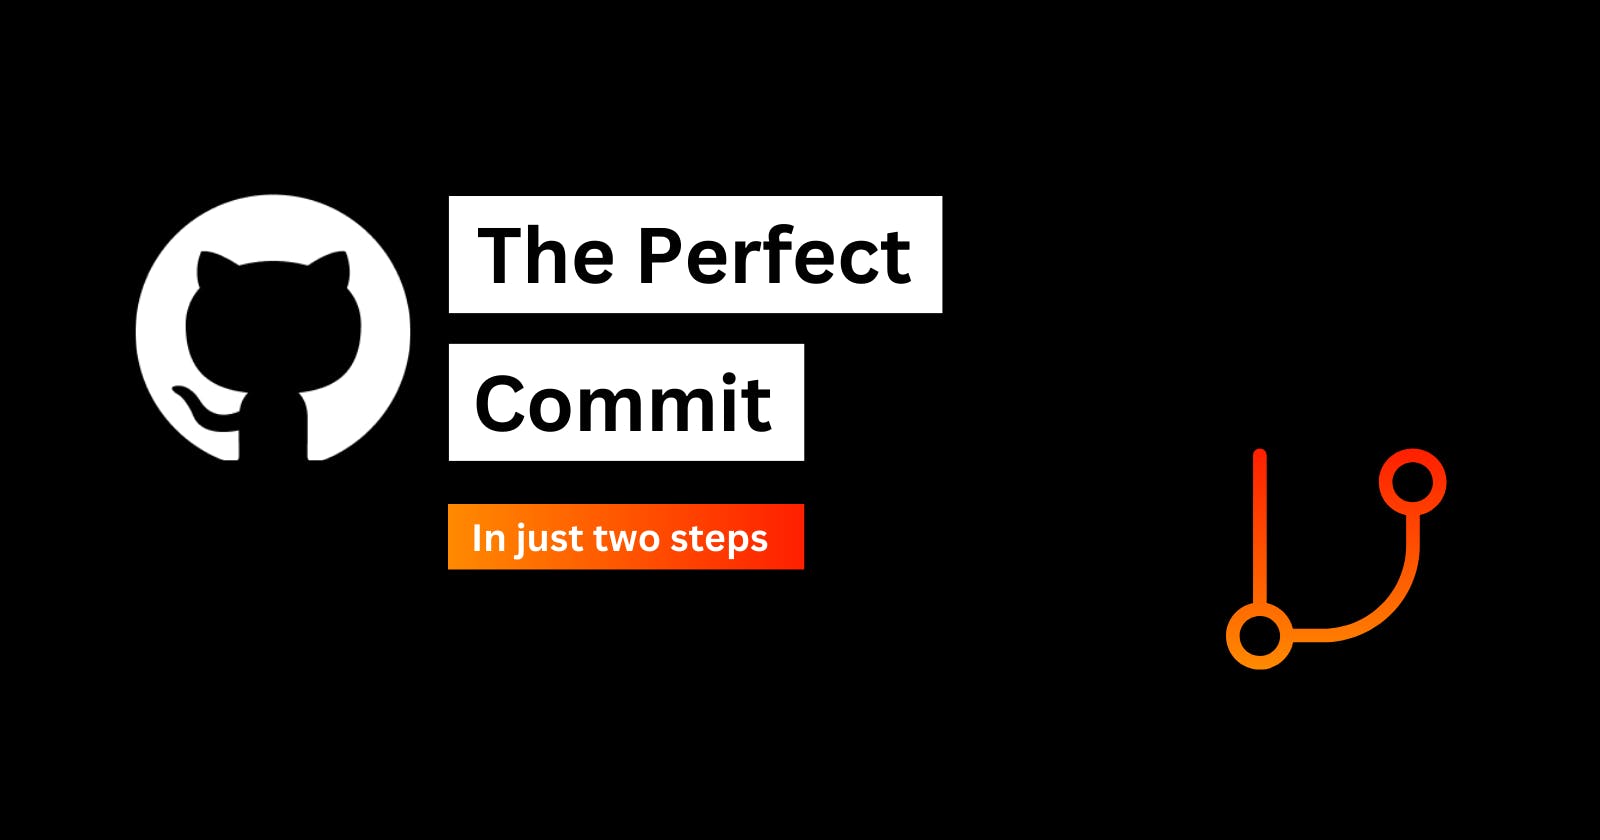 Learn to create the perfect commit in just two steps